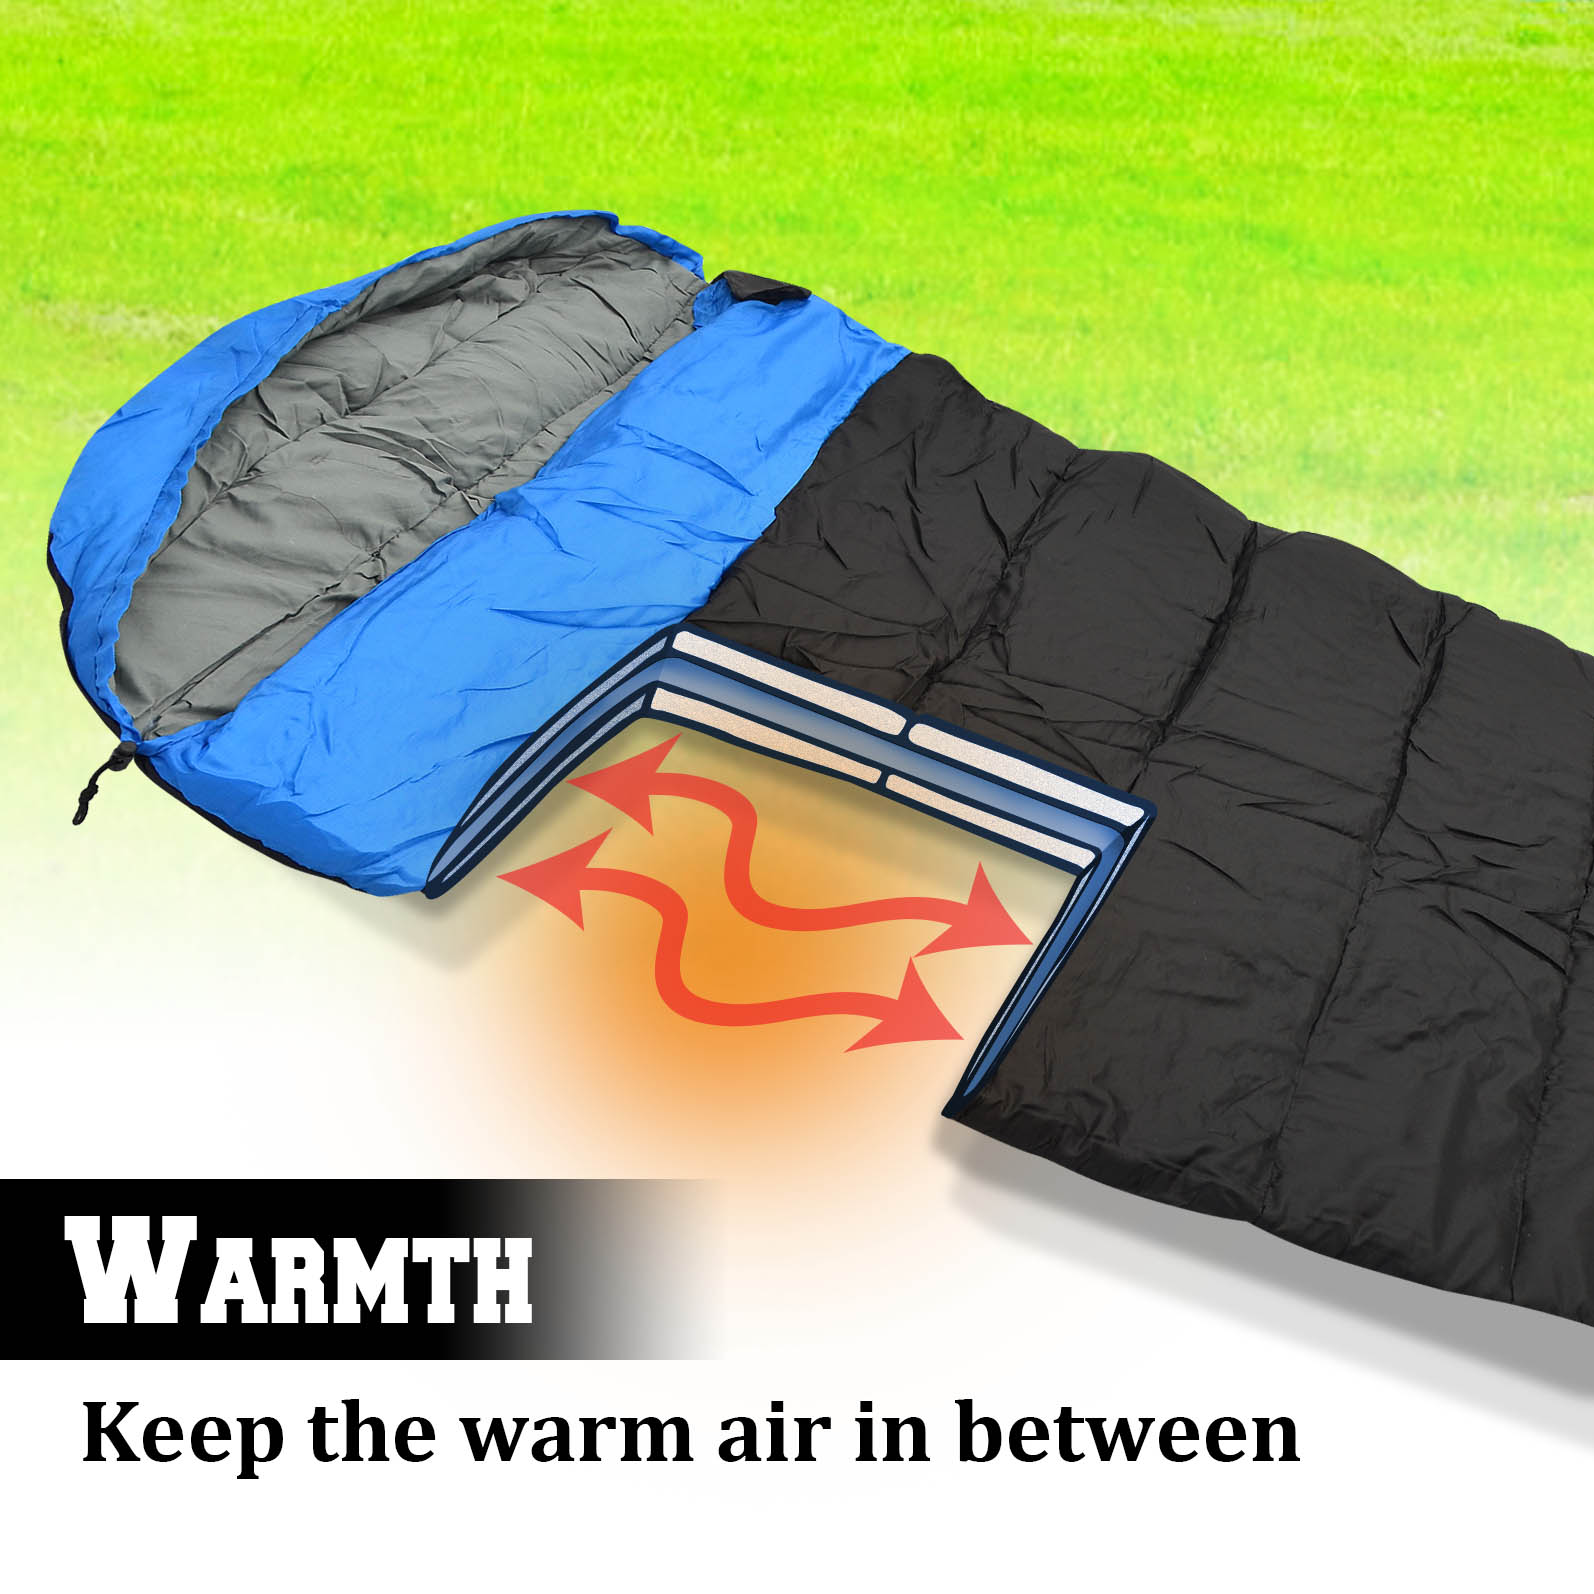 Sunrise Hooded Sleeping Bag Outdoor Camping or Indoor Sleep with Carry Bag(Blue) - image 5 of 9